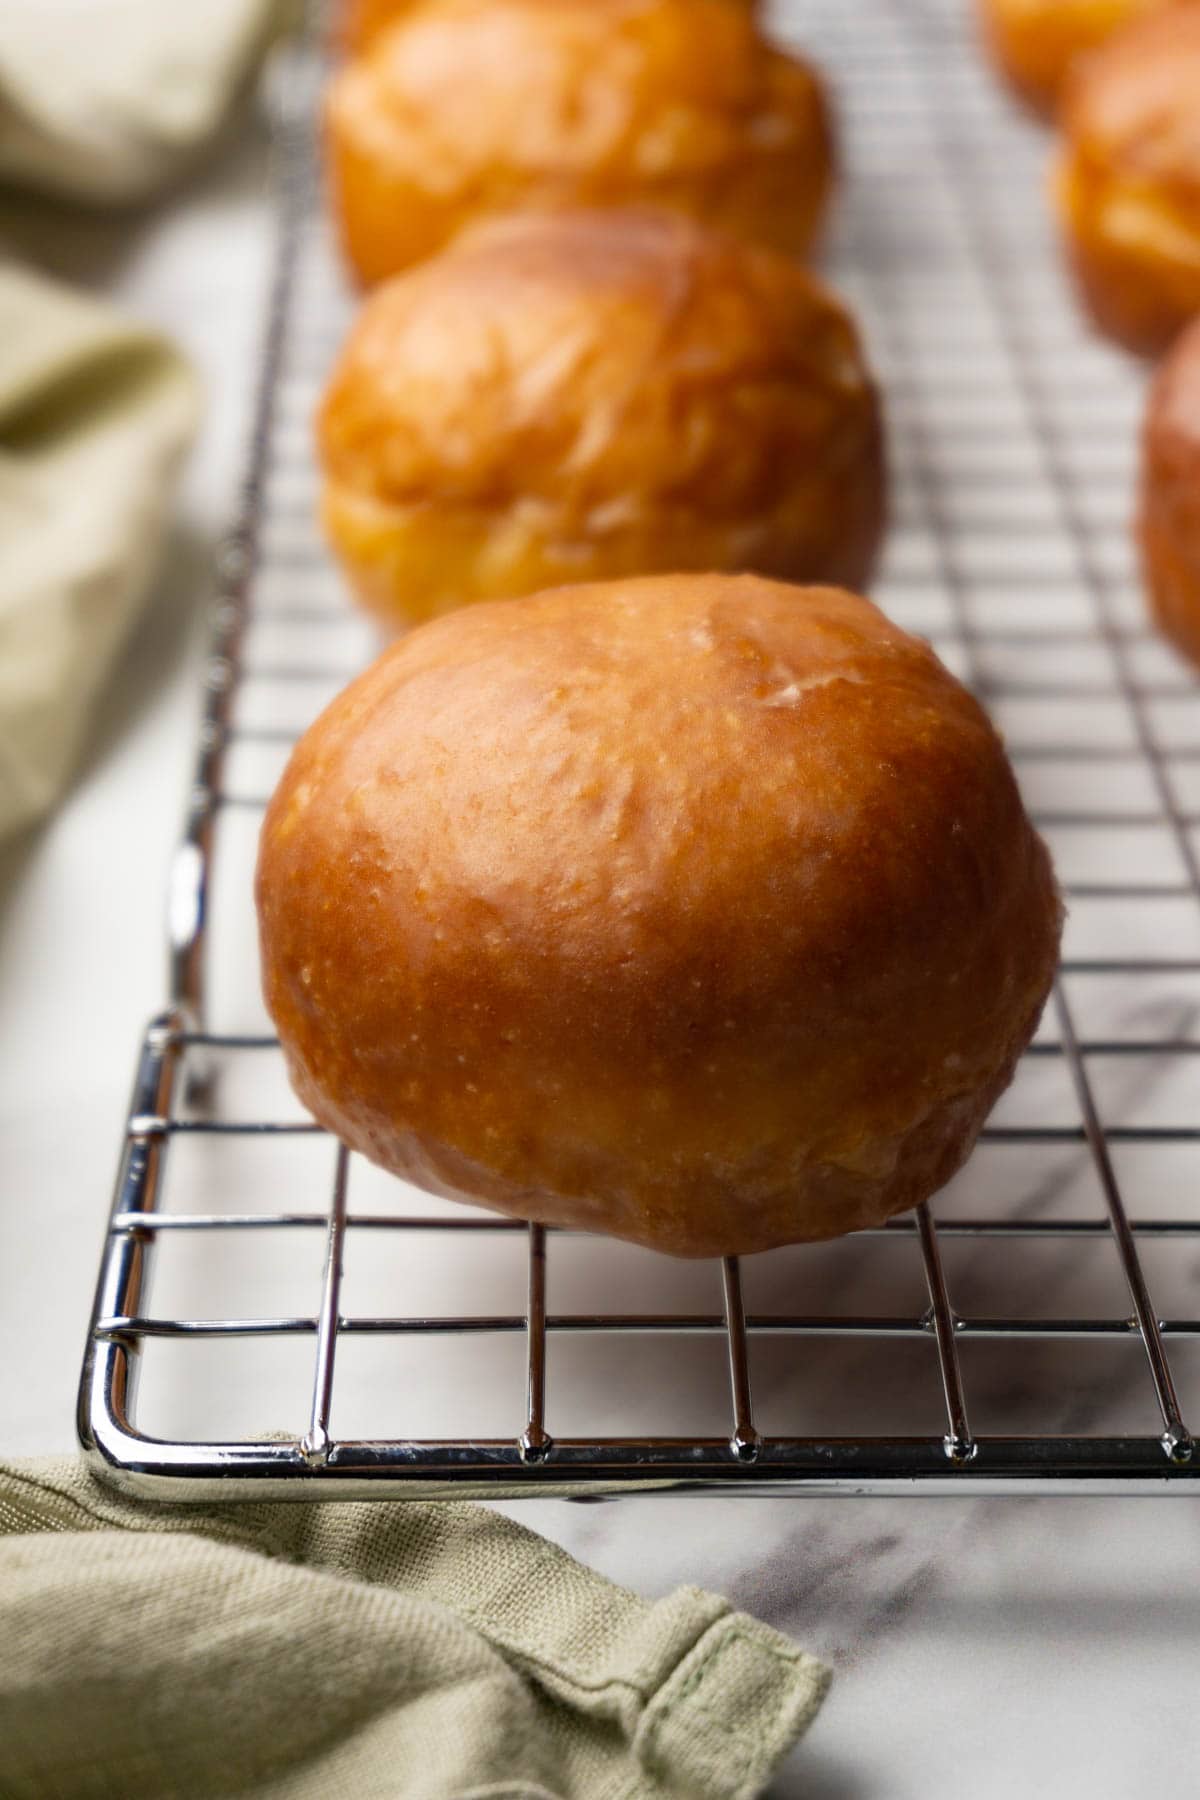 Donut holes covered in sugar glaze are on a metal cooling rack.